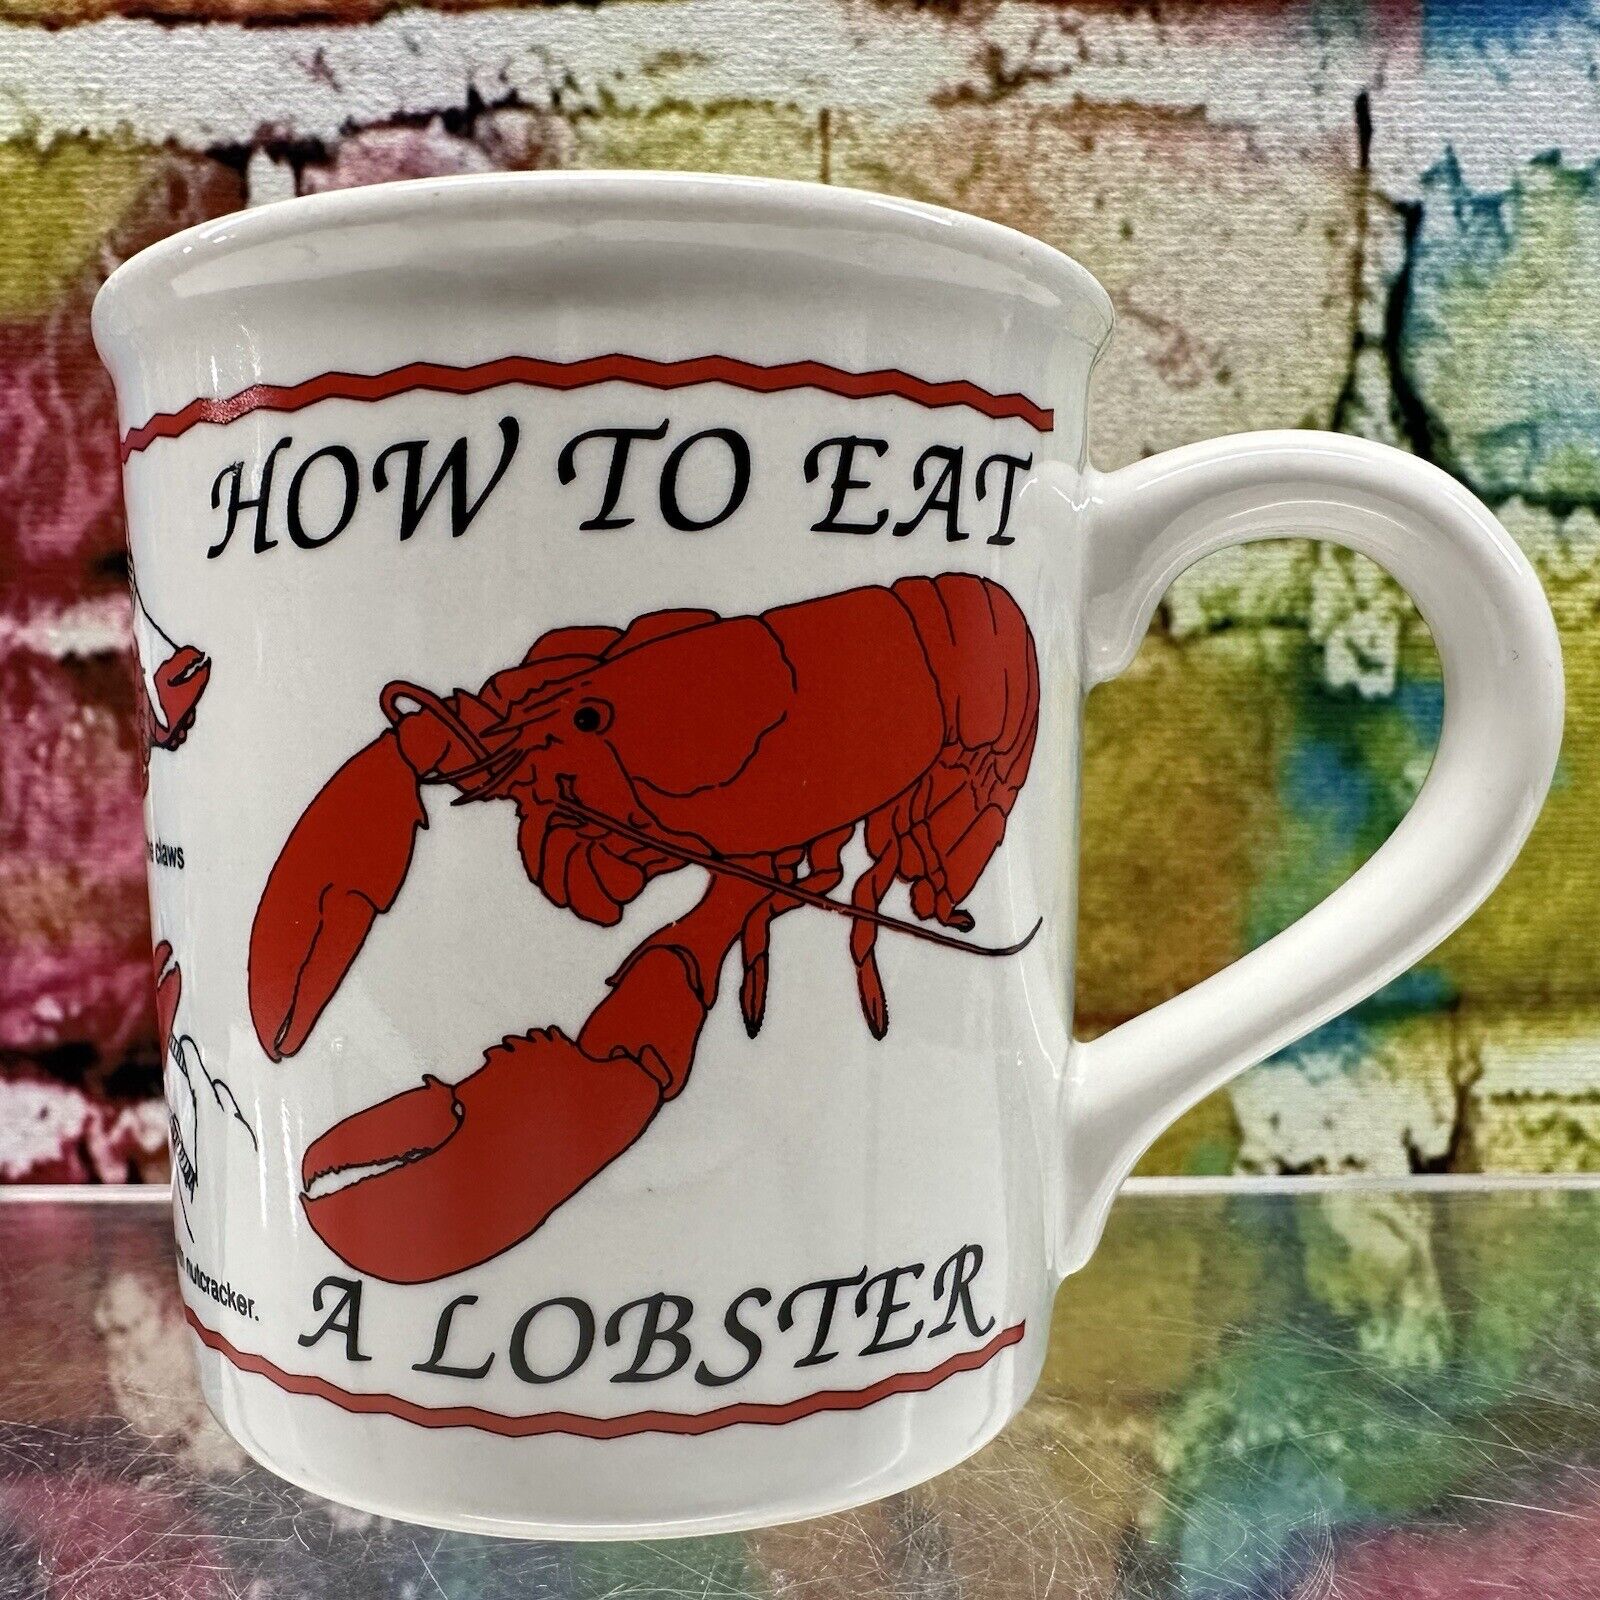 HOW TO EAT A LOBSTER Coffee Mug Tea Cup Claws Nutcracker Meat Tail Seafood CSI.